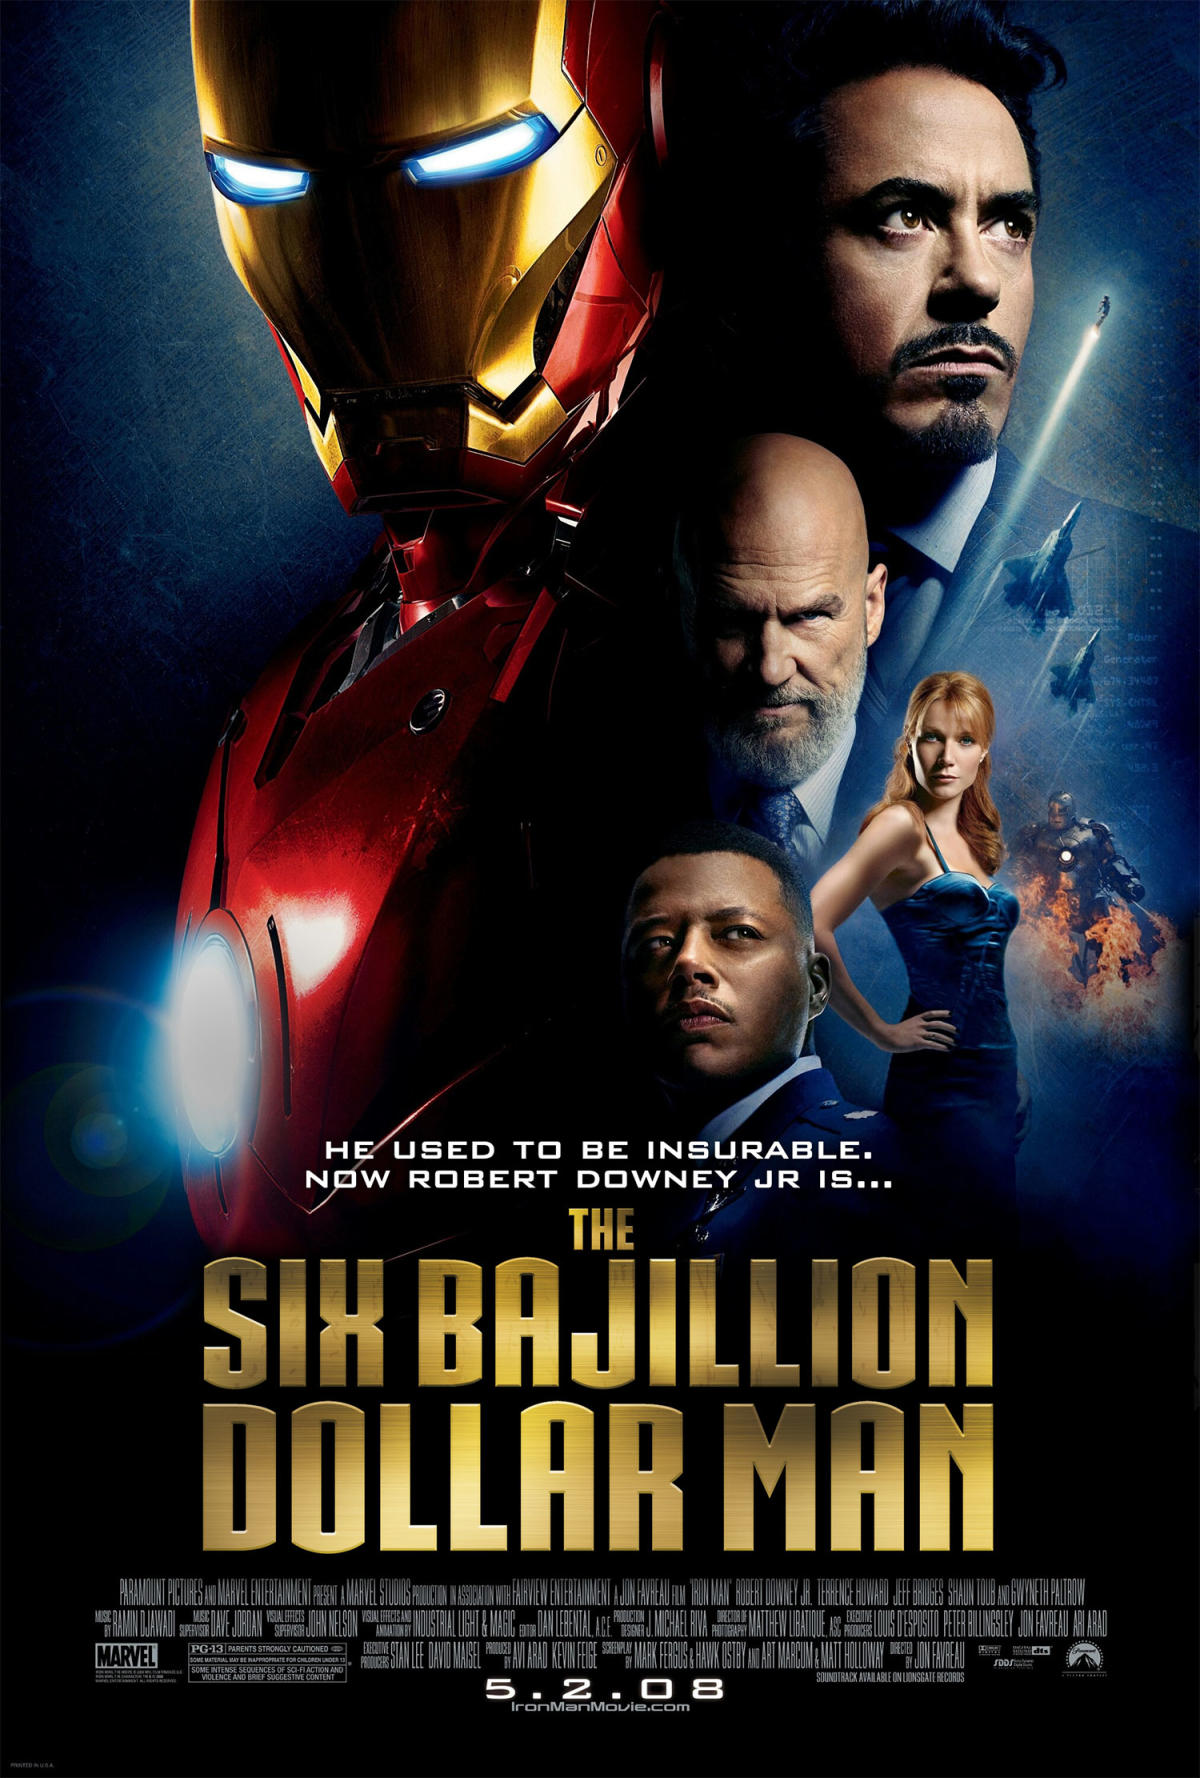 If Marvel Studios movie posters told the truth